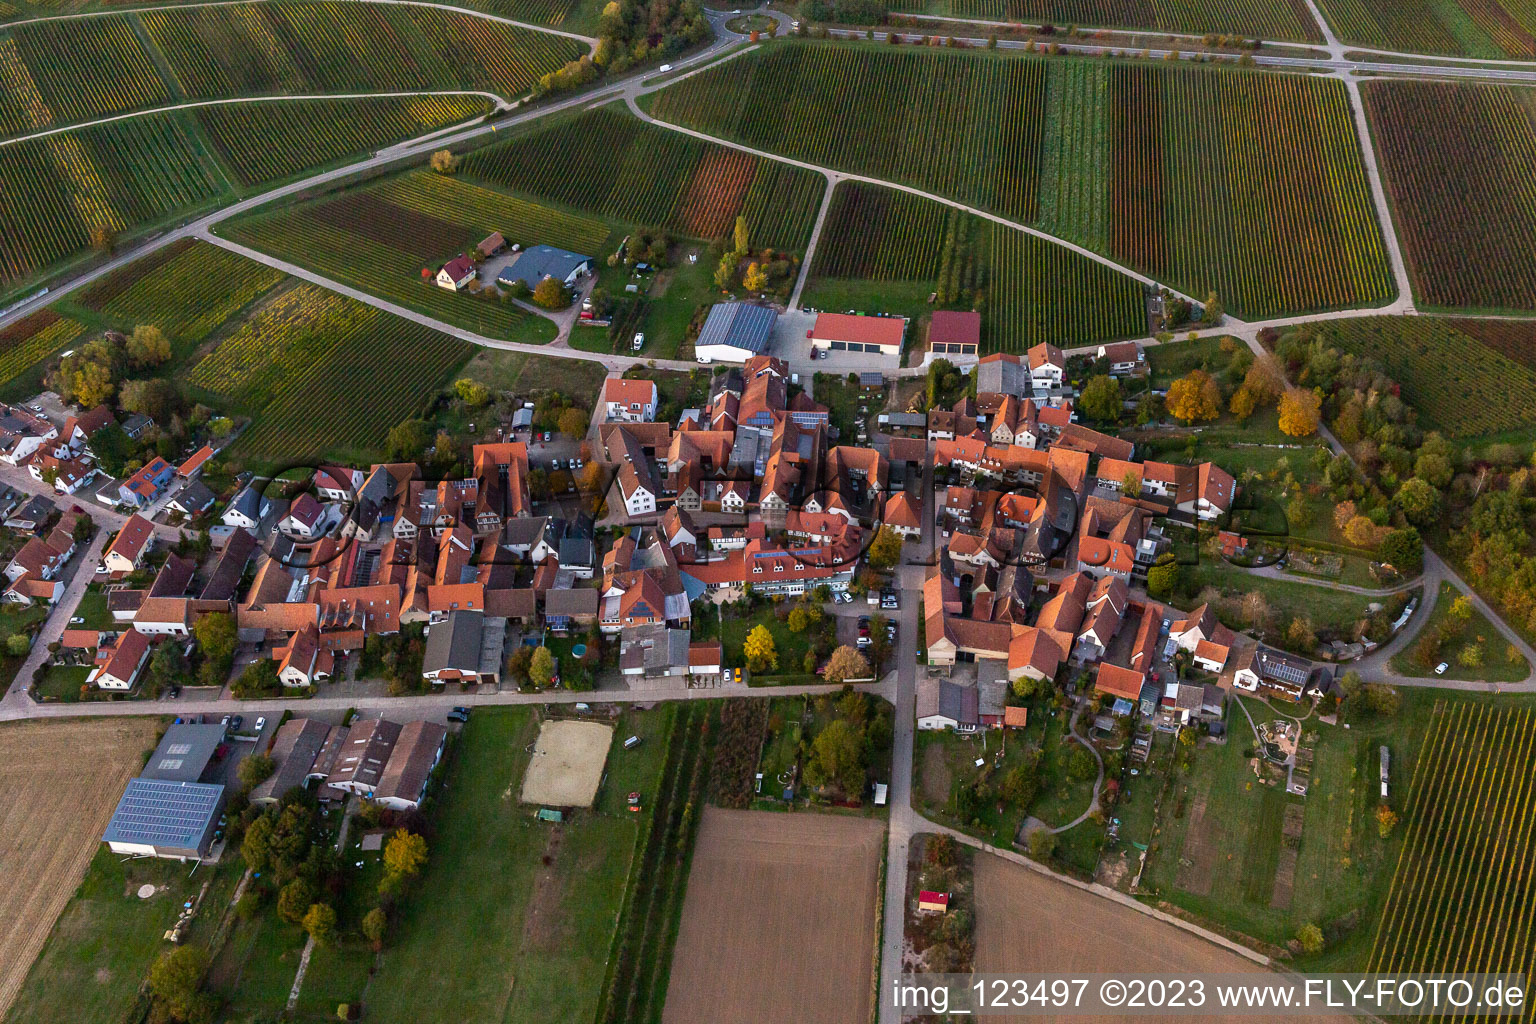 District Oberhofen in Pleisweiler-Oberhofen in the state Rhineland-Palatinate, Germany out of the air